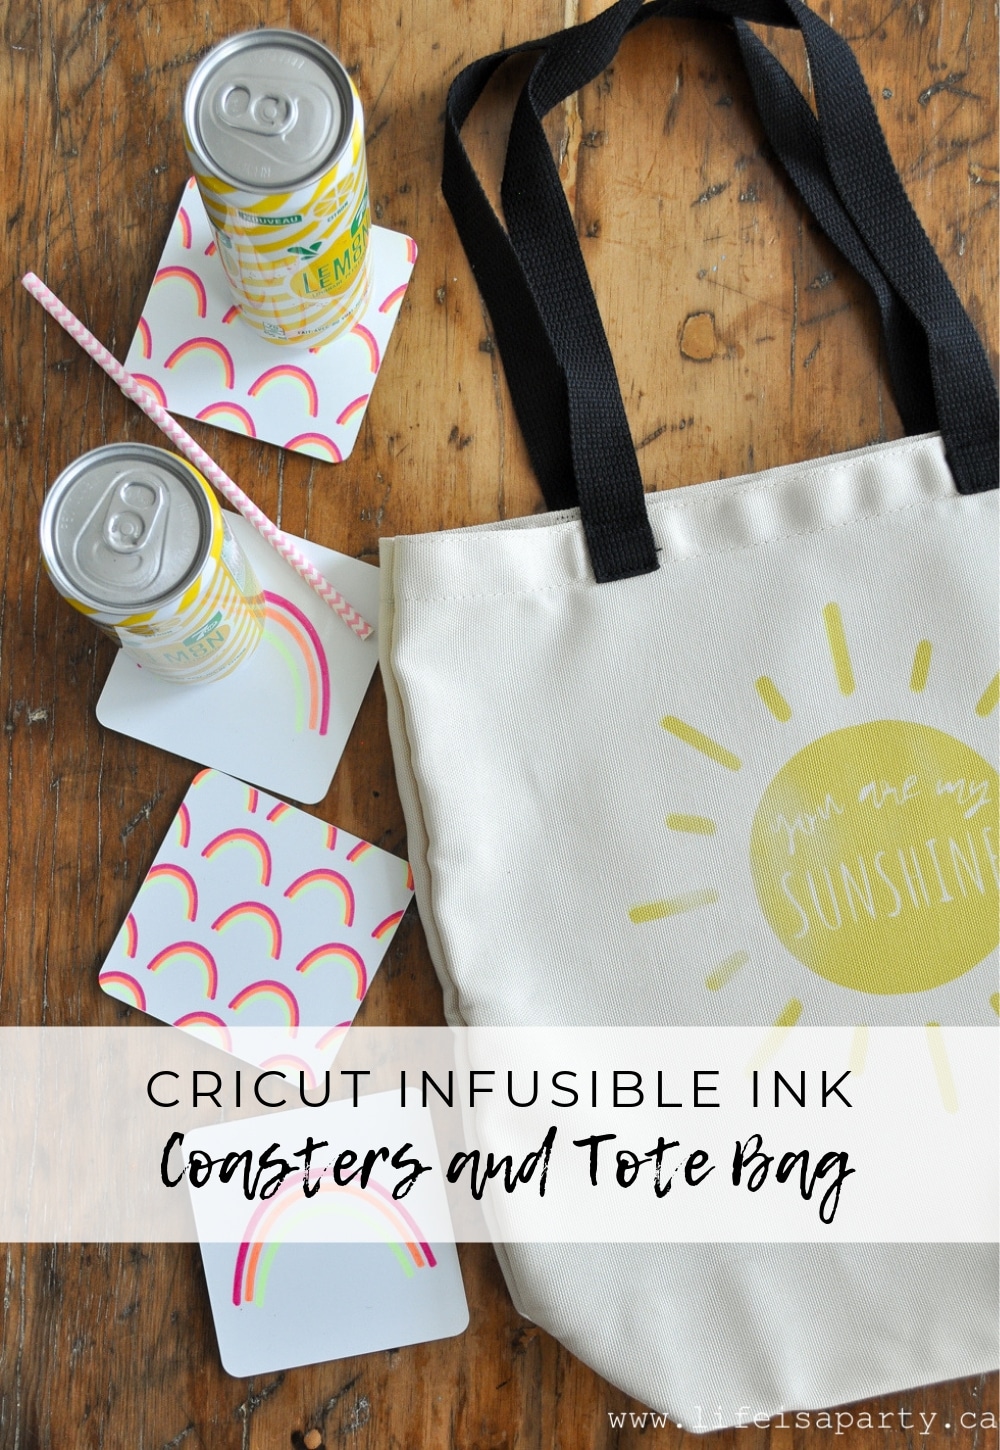 Cricut Infusible Ink Coasters and Tote Bag